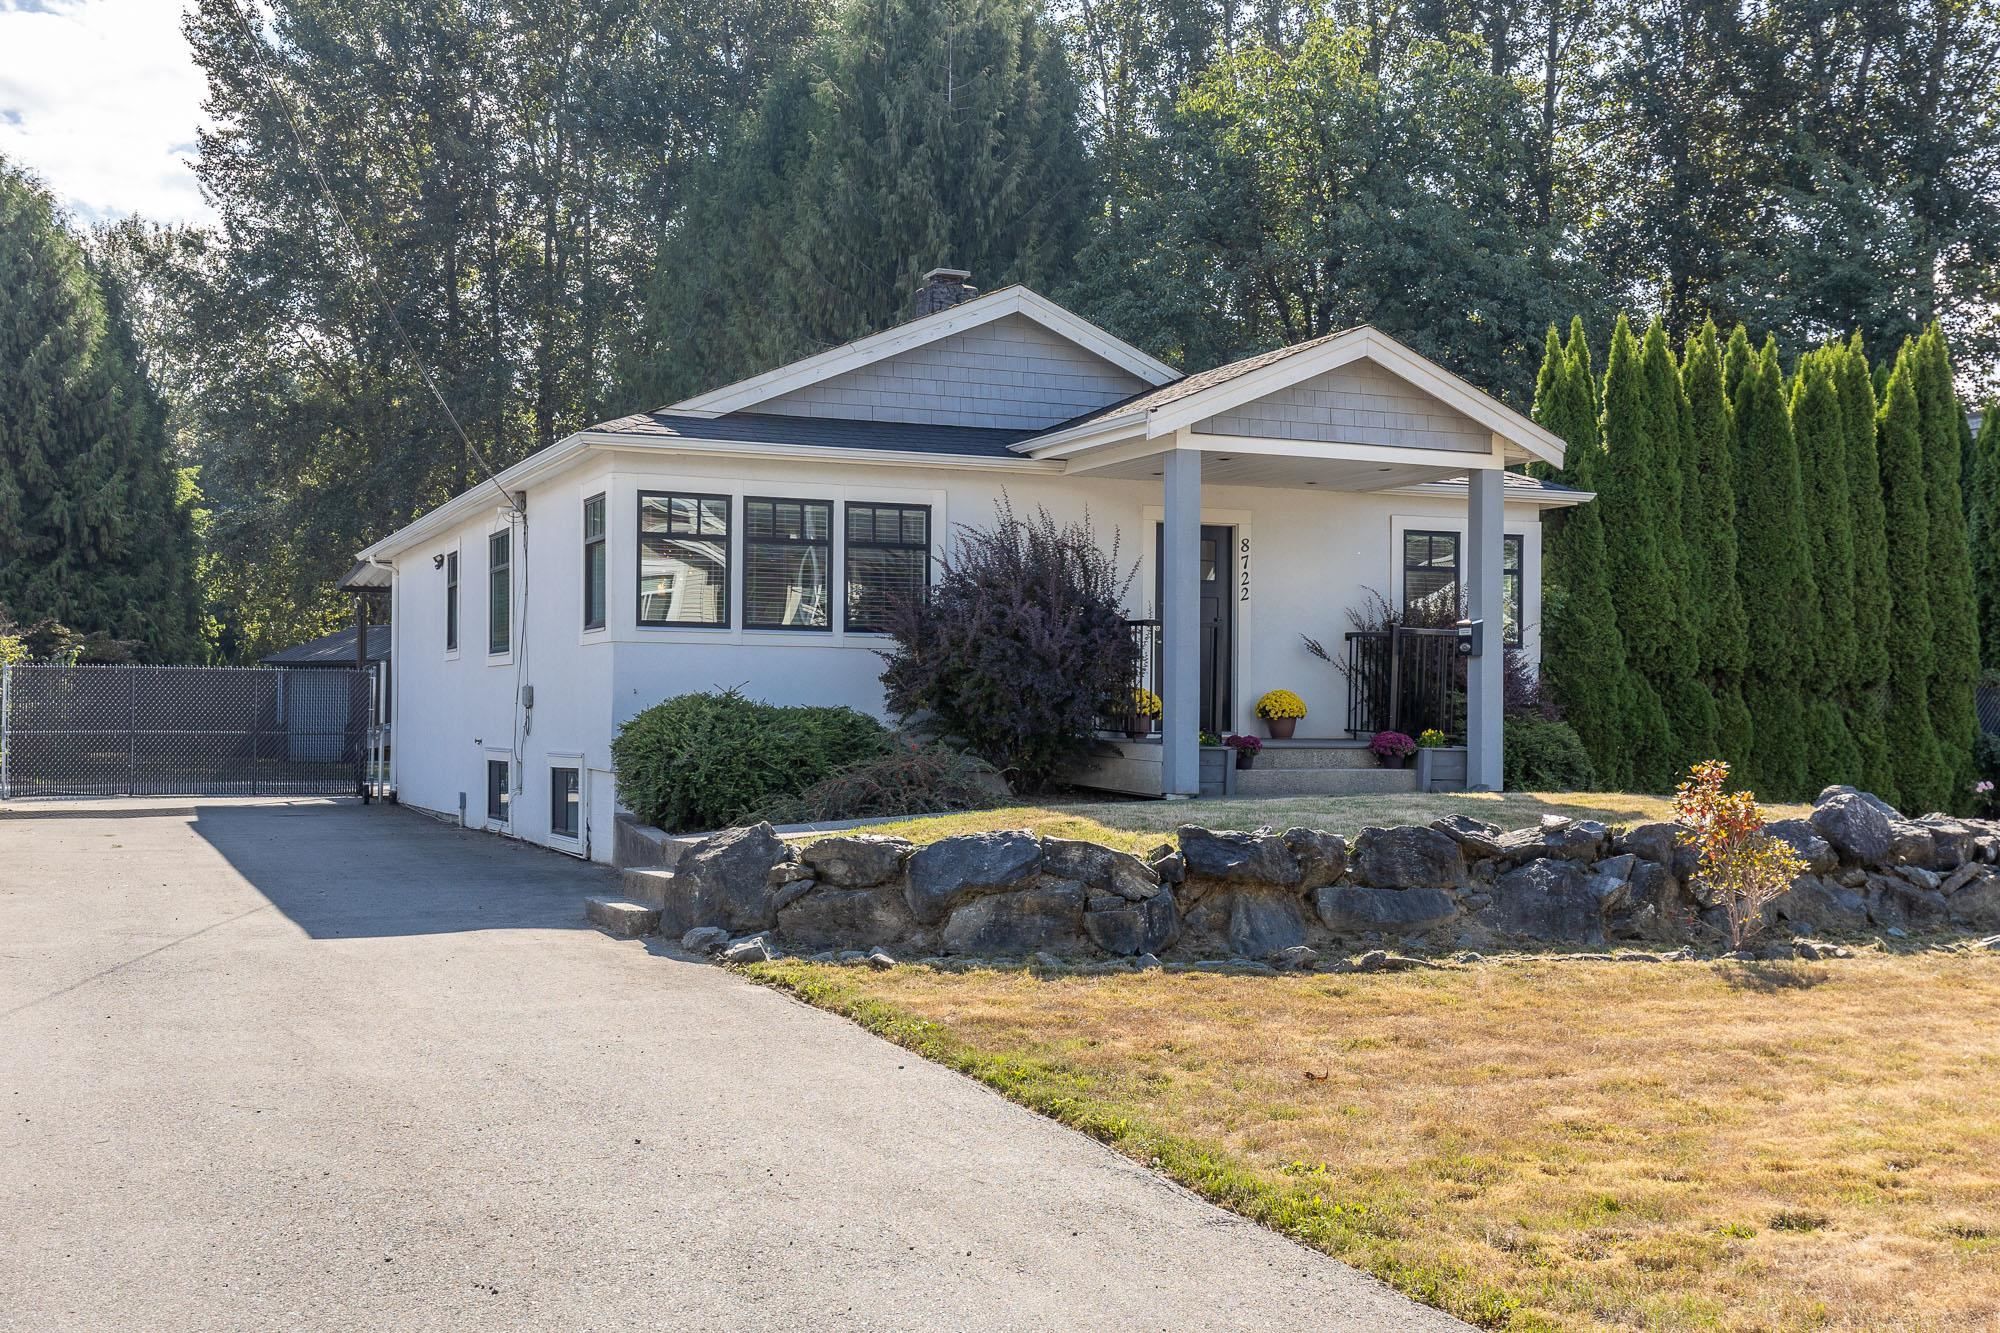 New property listed in Chilliwack Proper West, Chilliwack